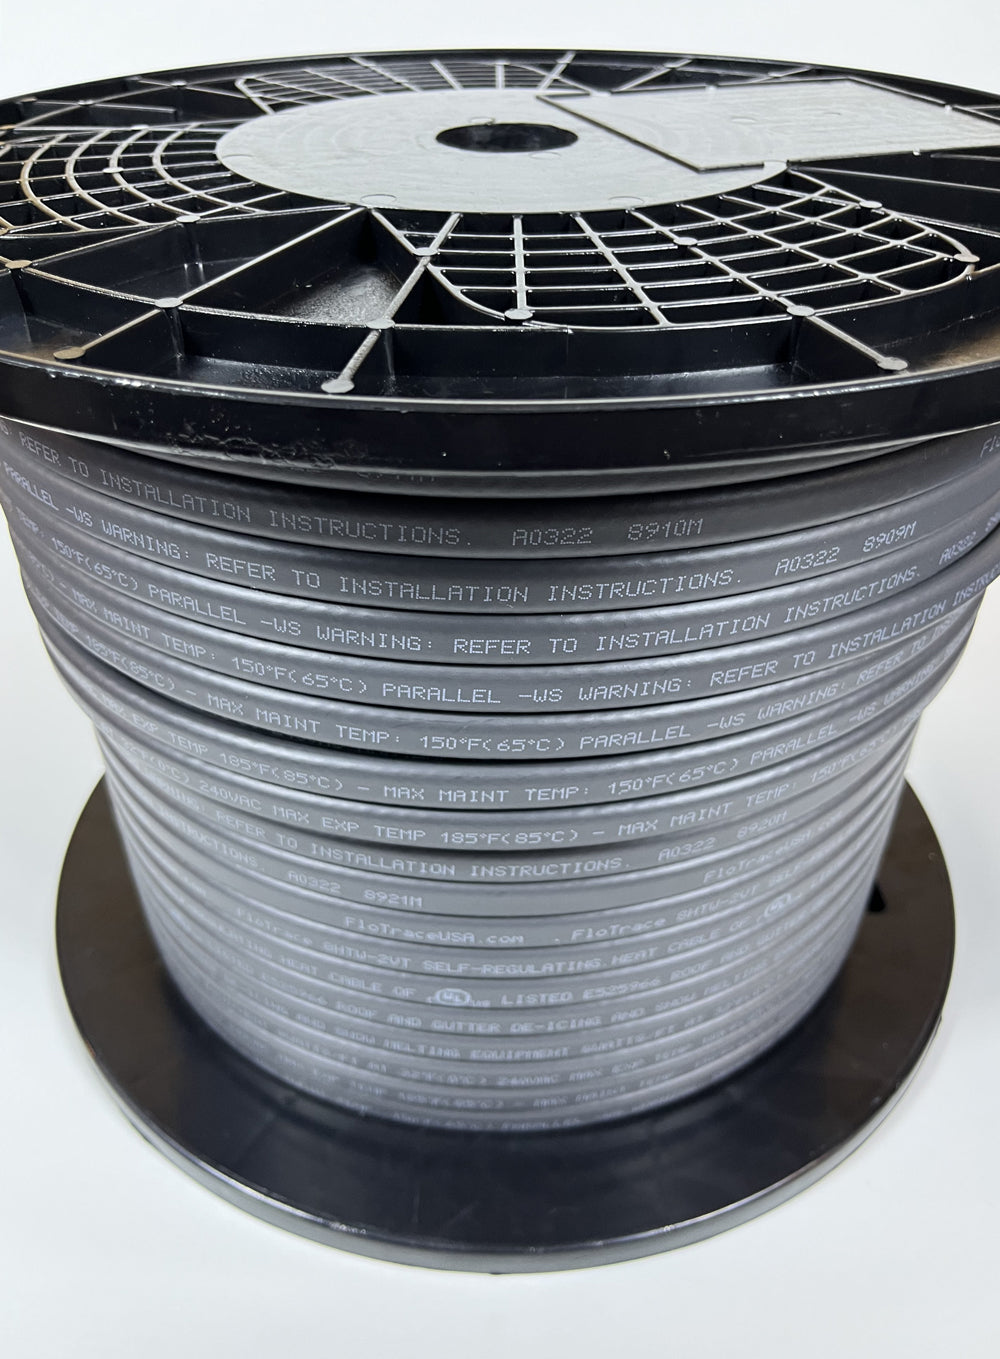 500 ft. of self-regulating heat trace cable